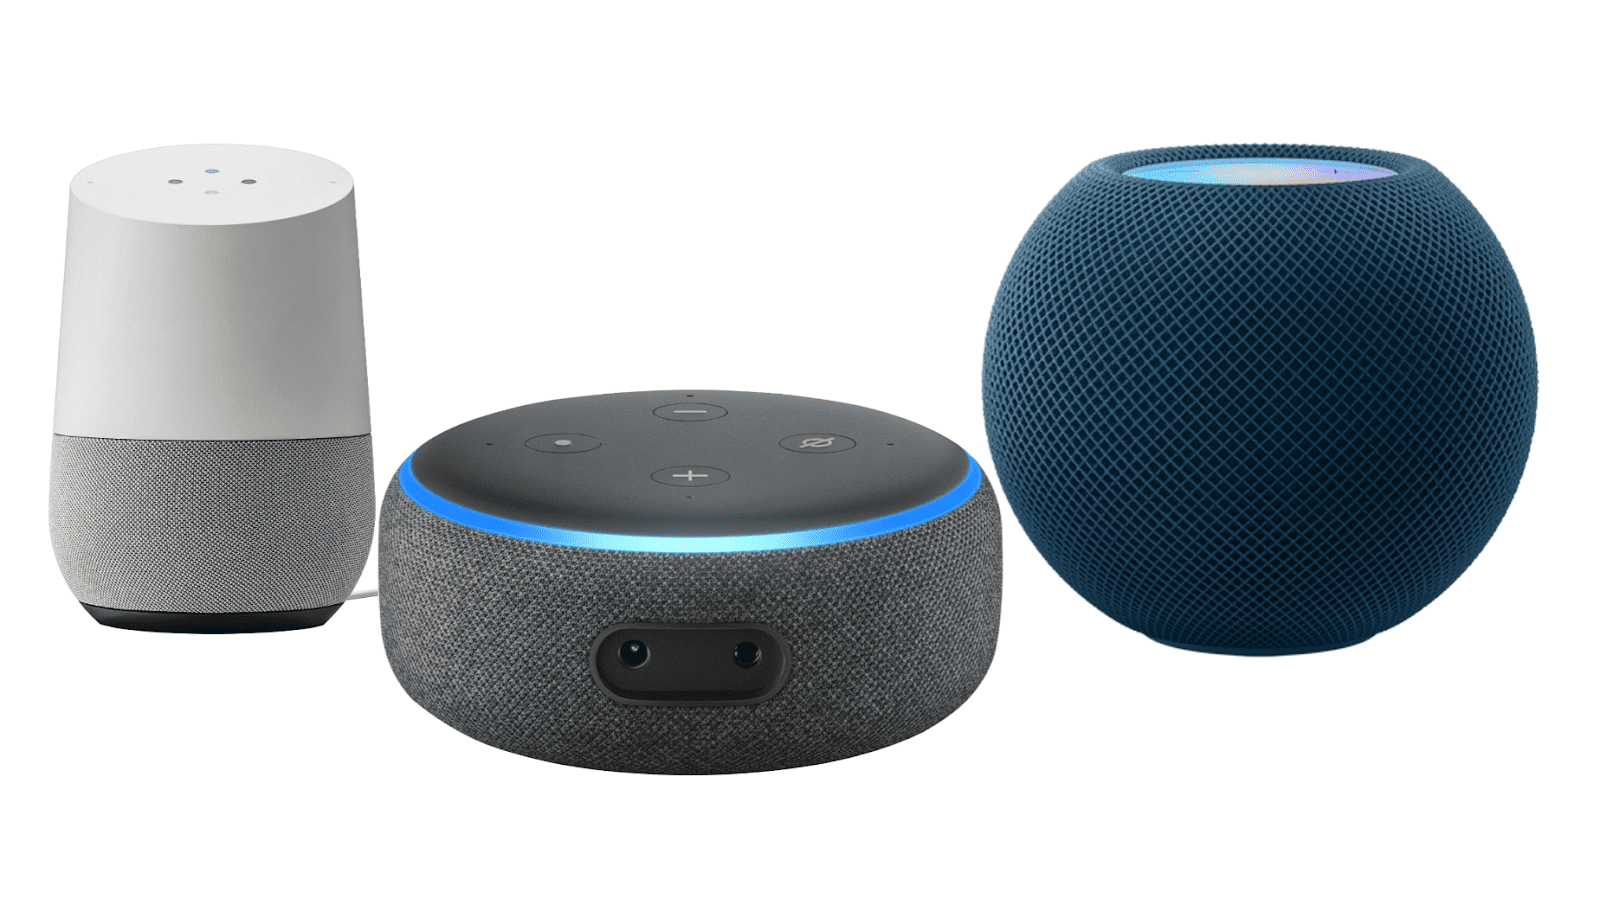 Google Home, Amazon Echo, and Apple HomePod devices displayed side by side